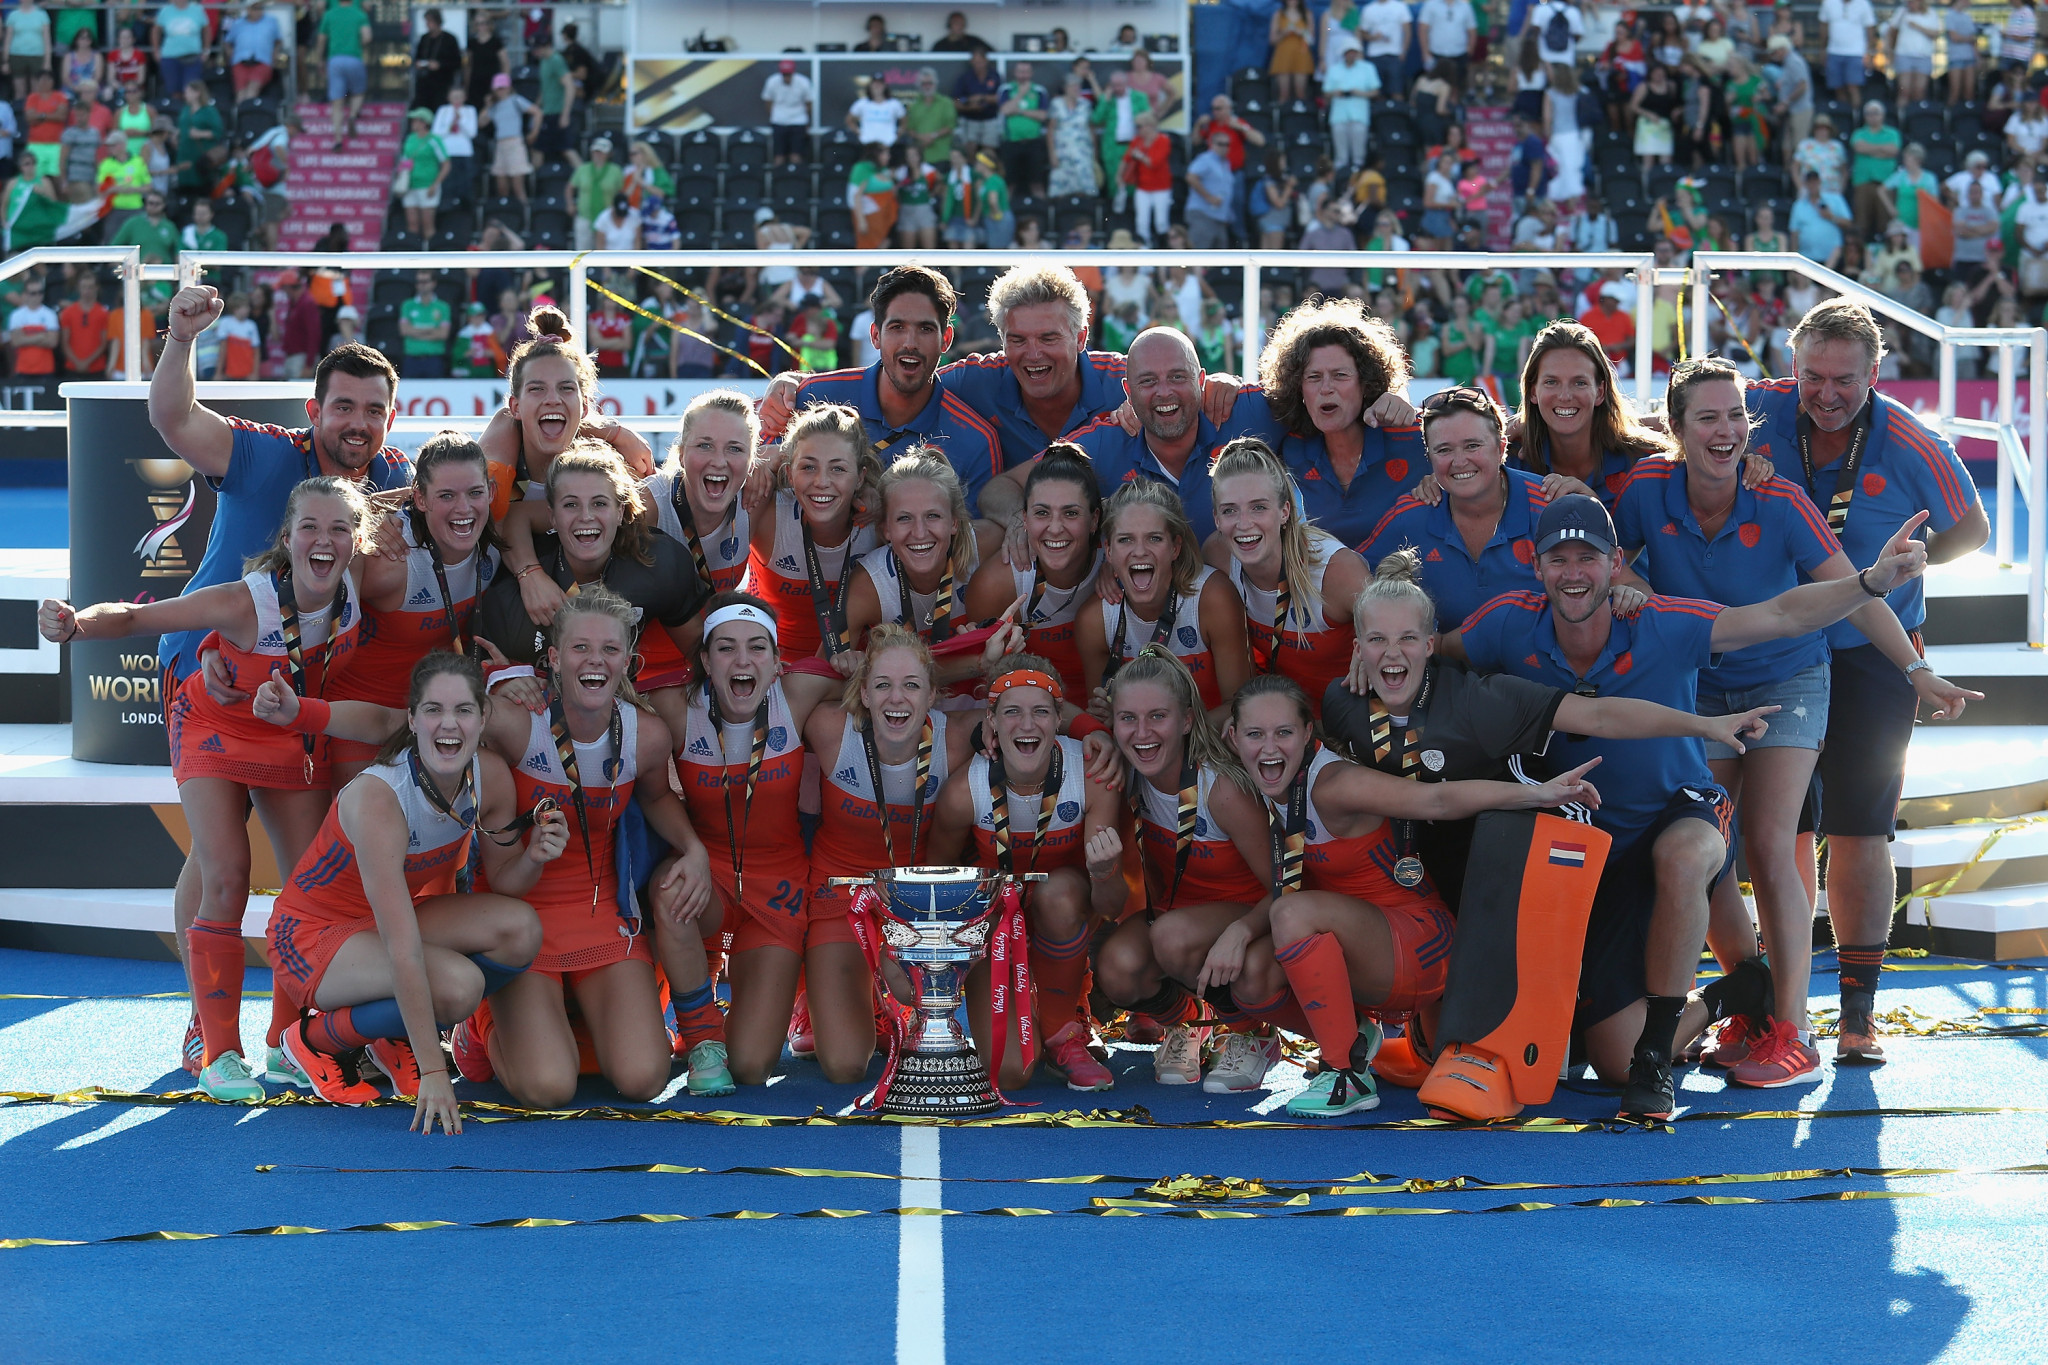 Ireland climb into top 10 as Dutch retain first place on FIH women's world rankings